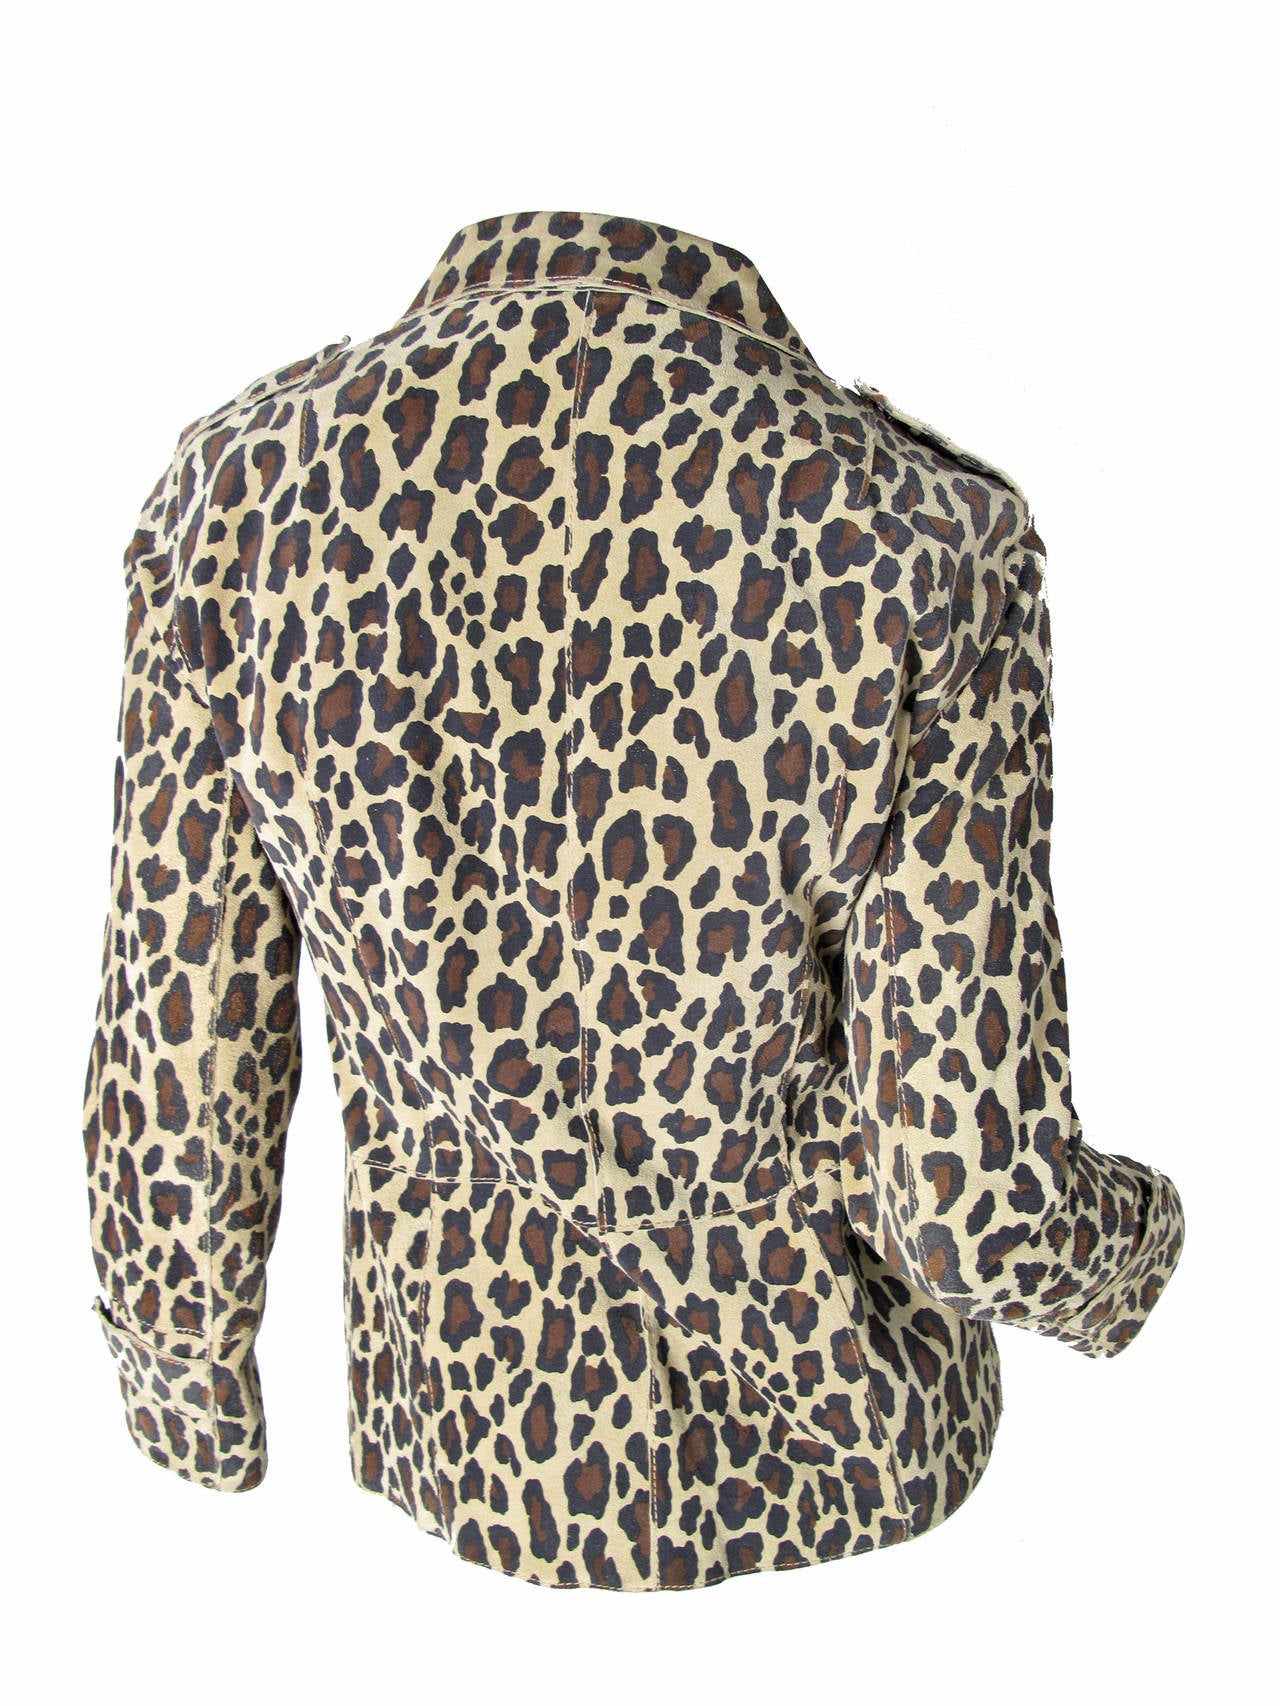 Dolce & Gabbana suede leopard print jacket. Snaps to close. 34